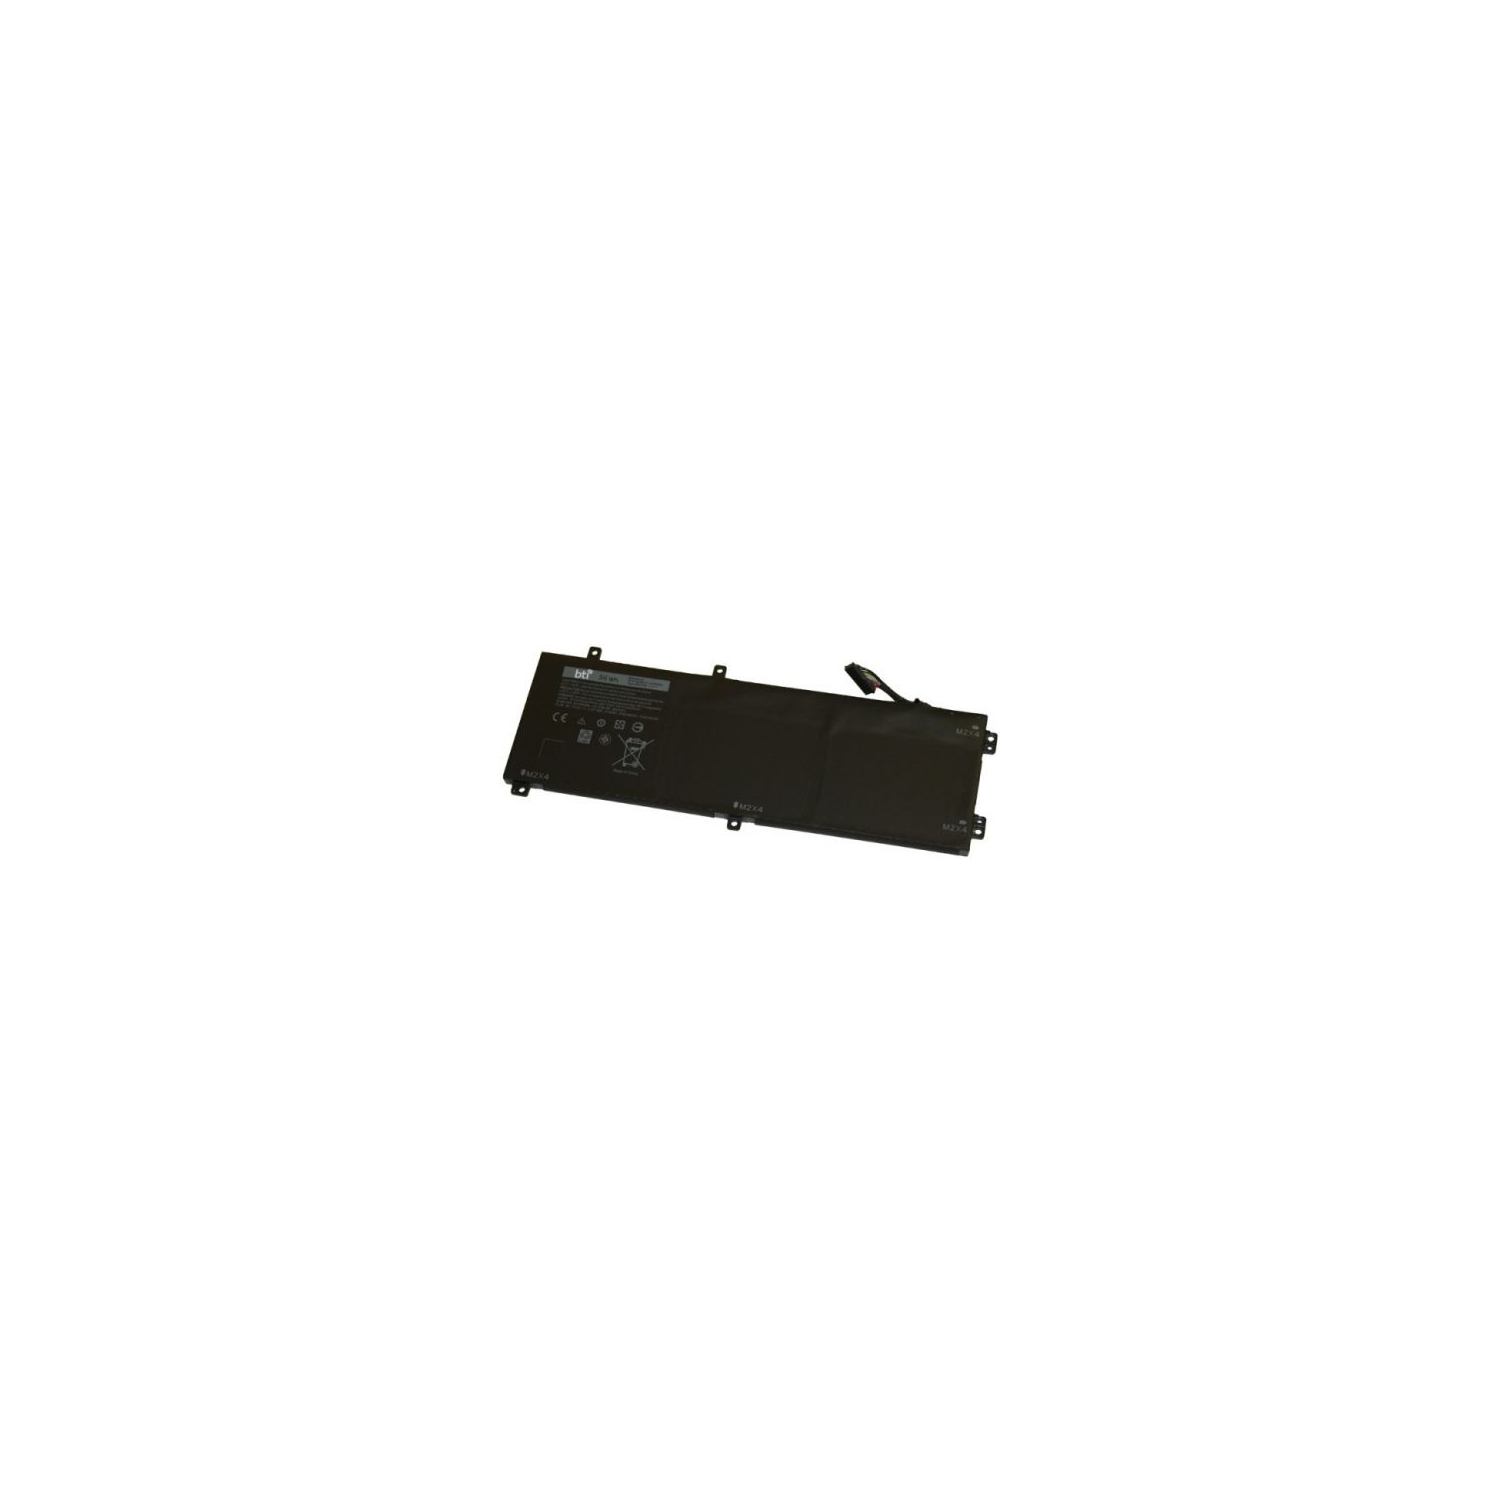 BTI Laptop Battery for Dell XPS 15 9570